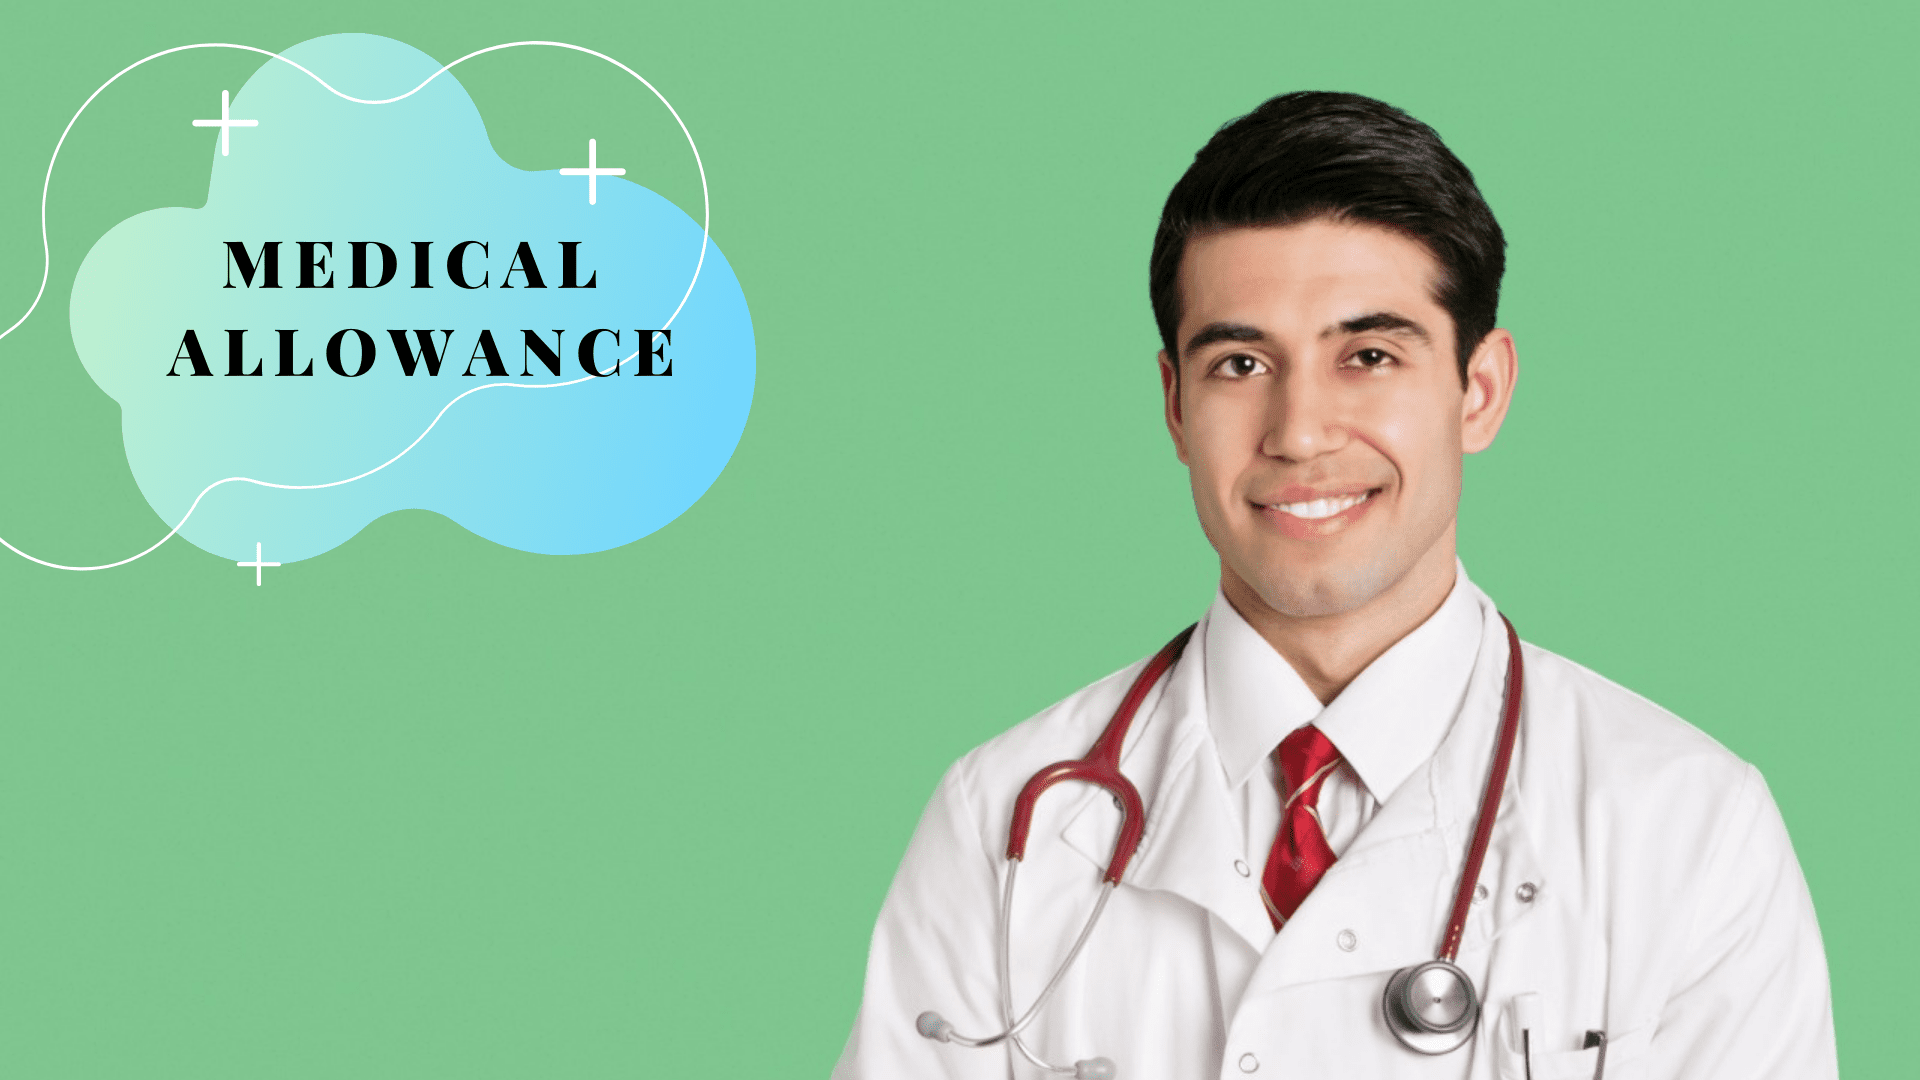 How to Surrender ECHS Facility and Receive Fixed Medical Allowance: A Comprehensive Guide